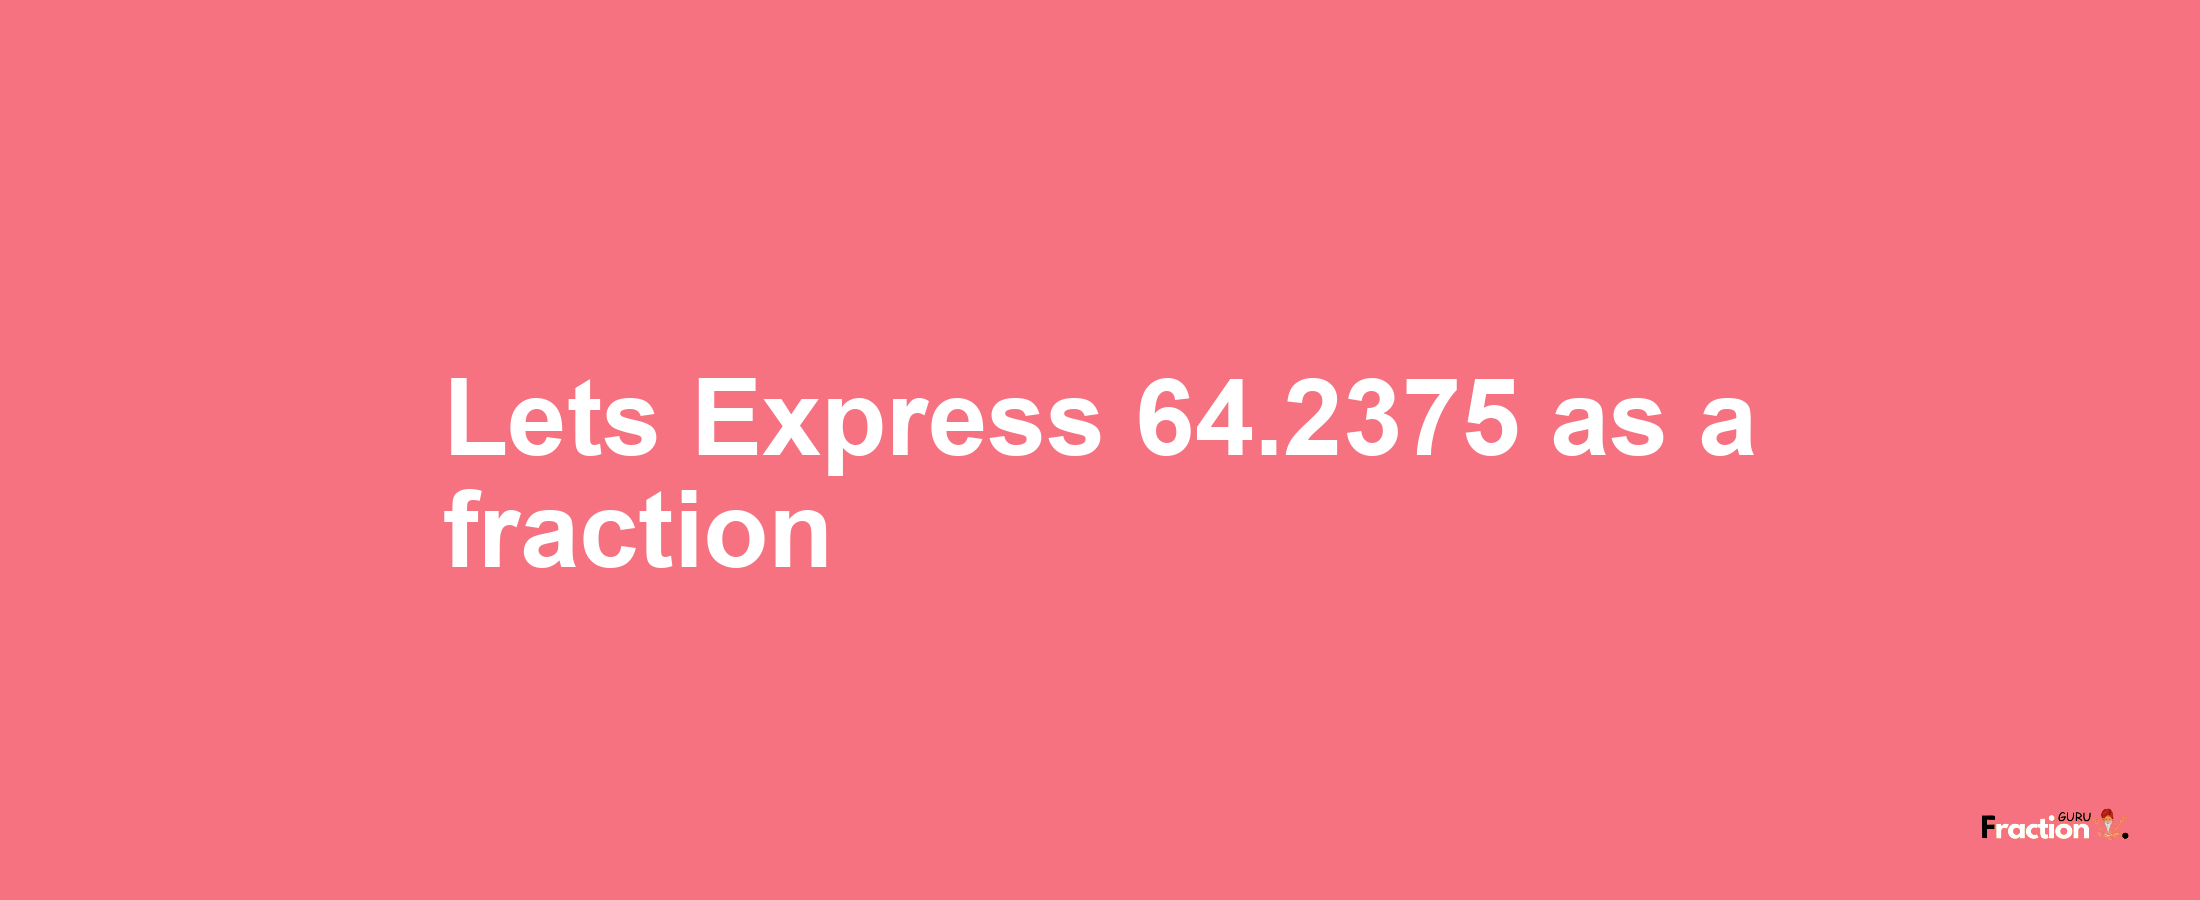 Lets Express 64.2375 as afraction